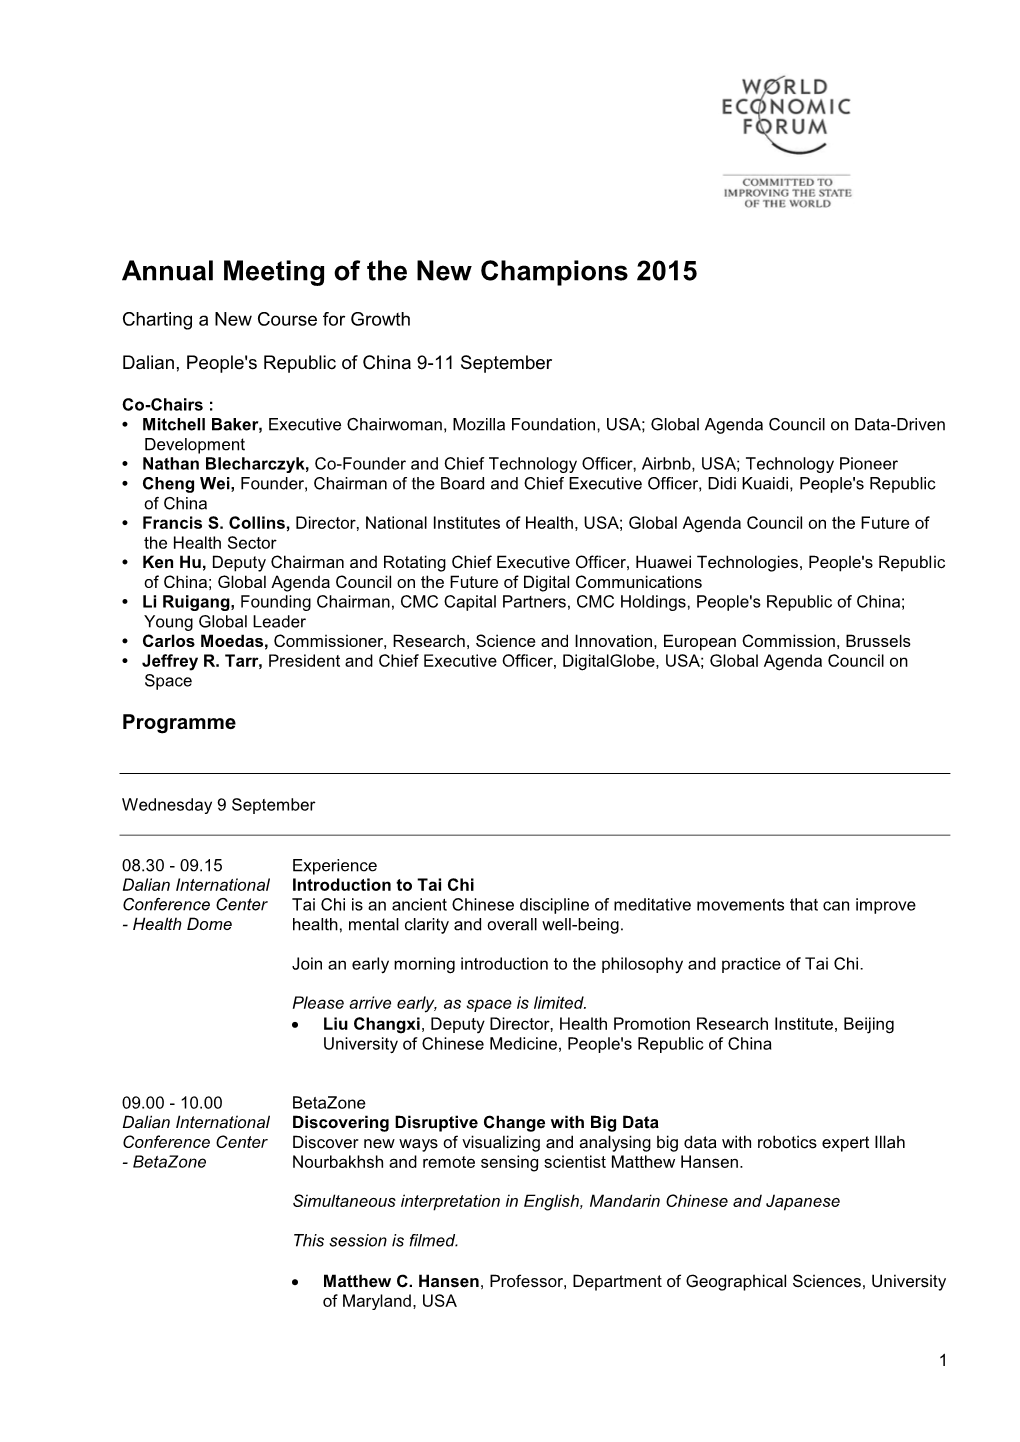 Annual Meeting of the New Champions 2015